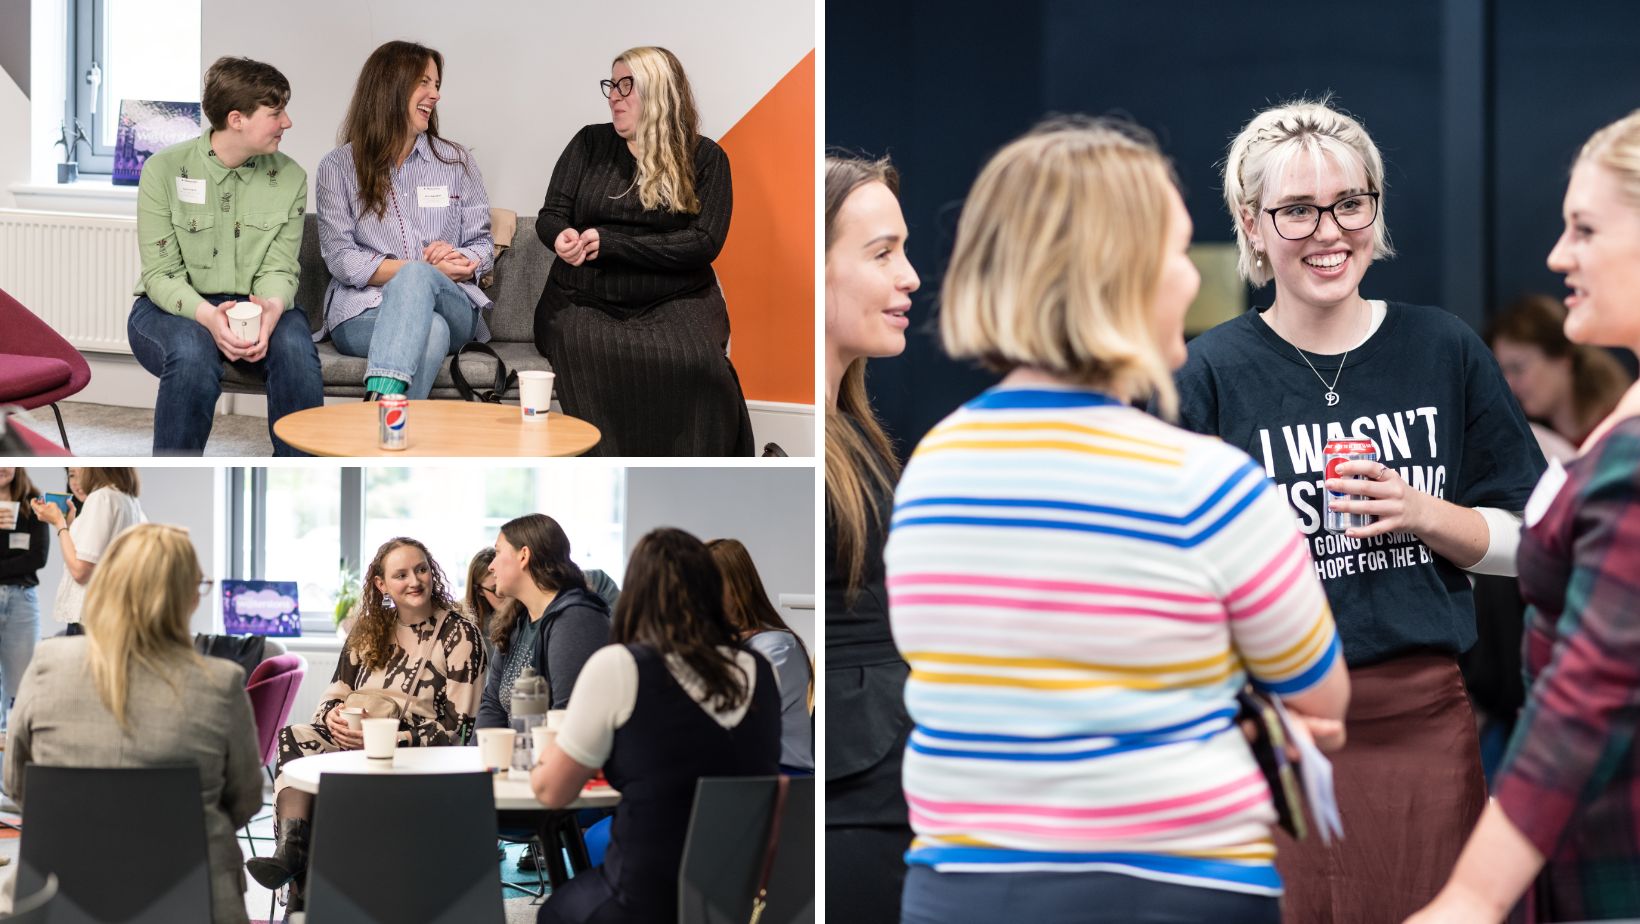 A selection of event images showing women chatting and smiling